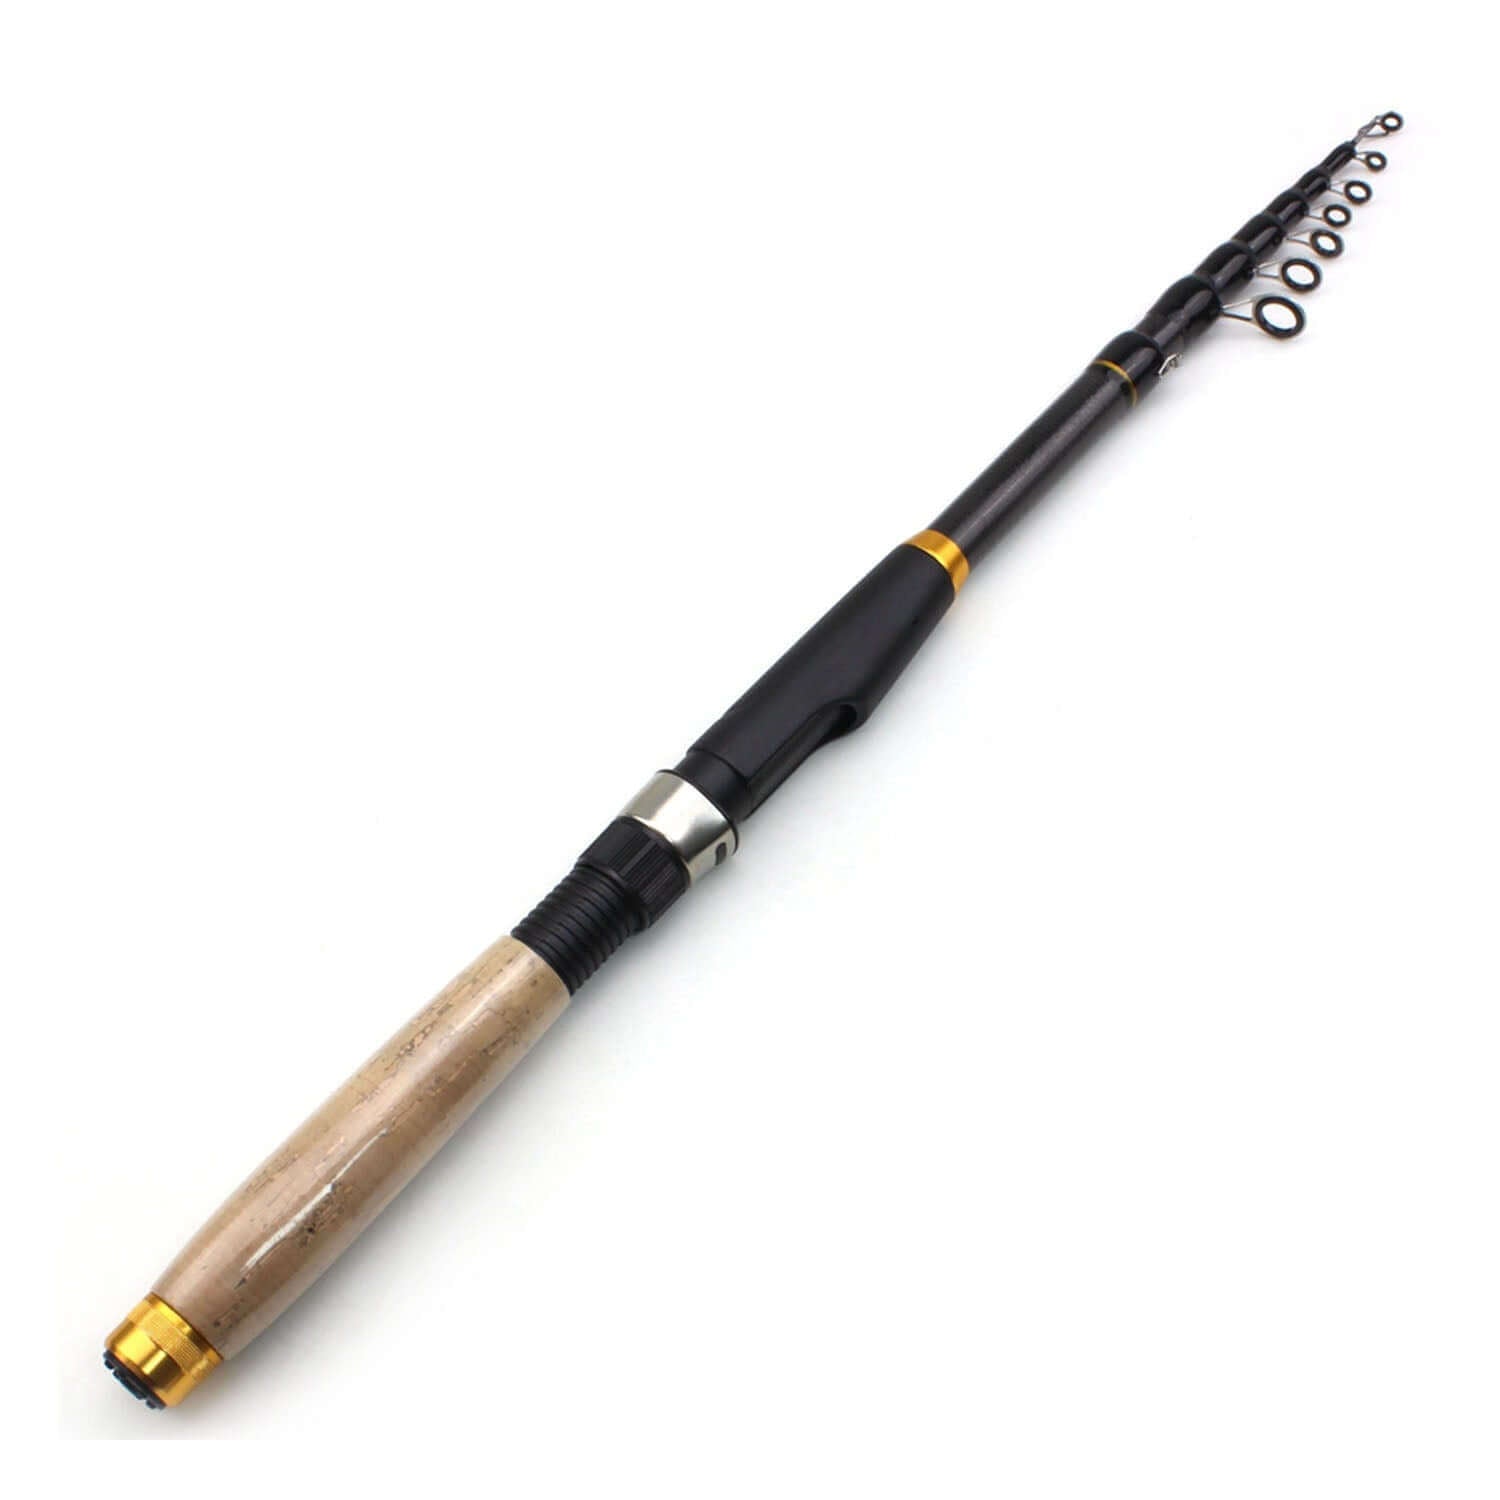 Travel Fishing Rods: Your Ultimate Guide